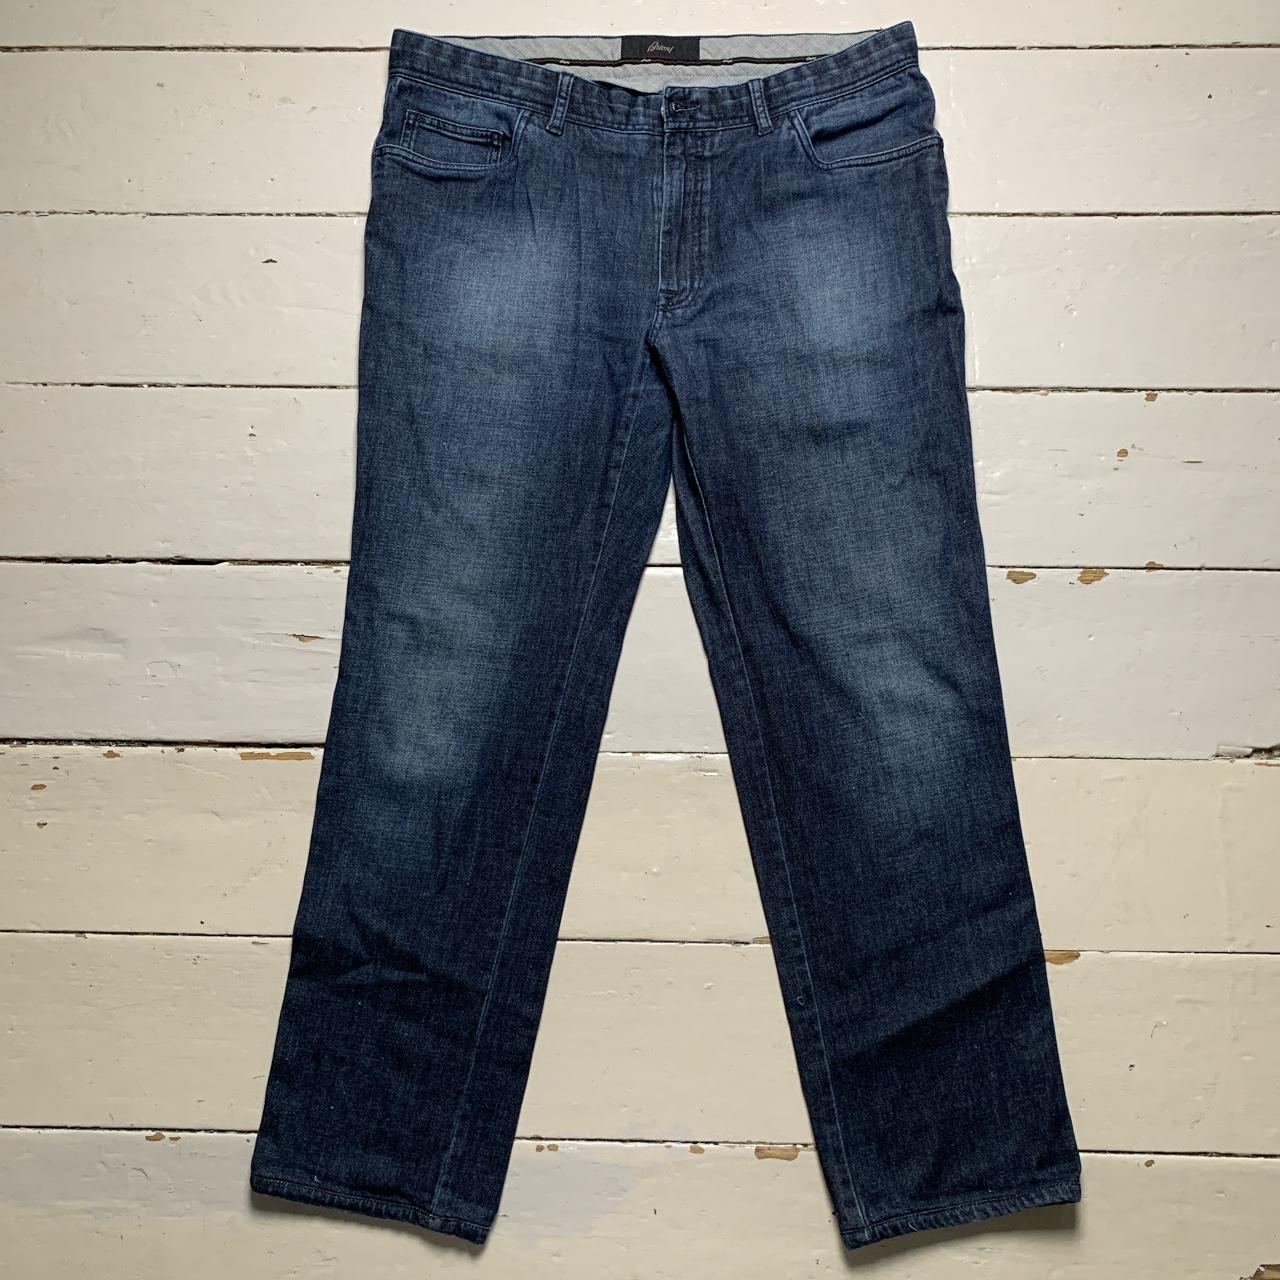 Brioni Jeans Navy and Black